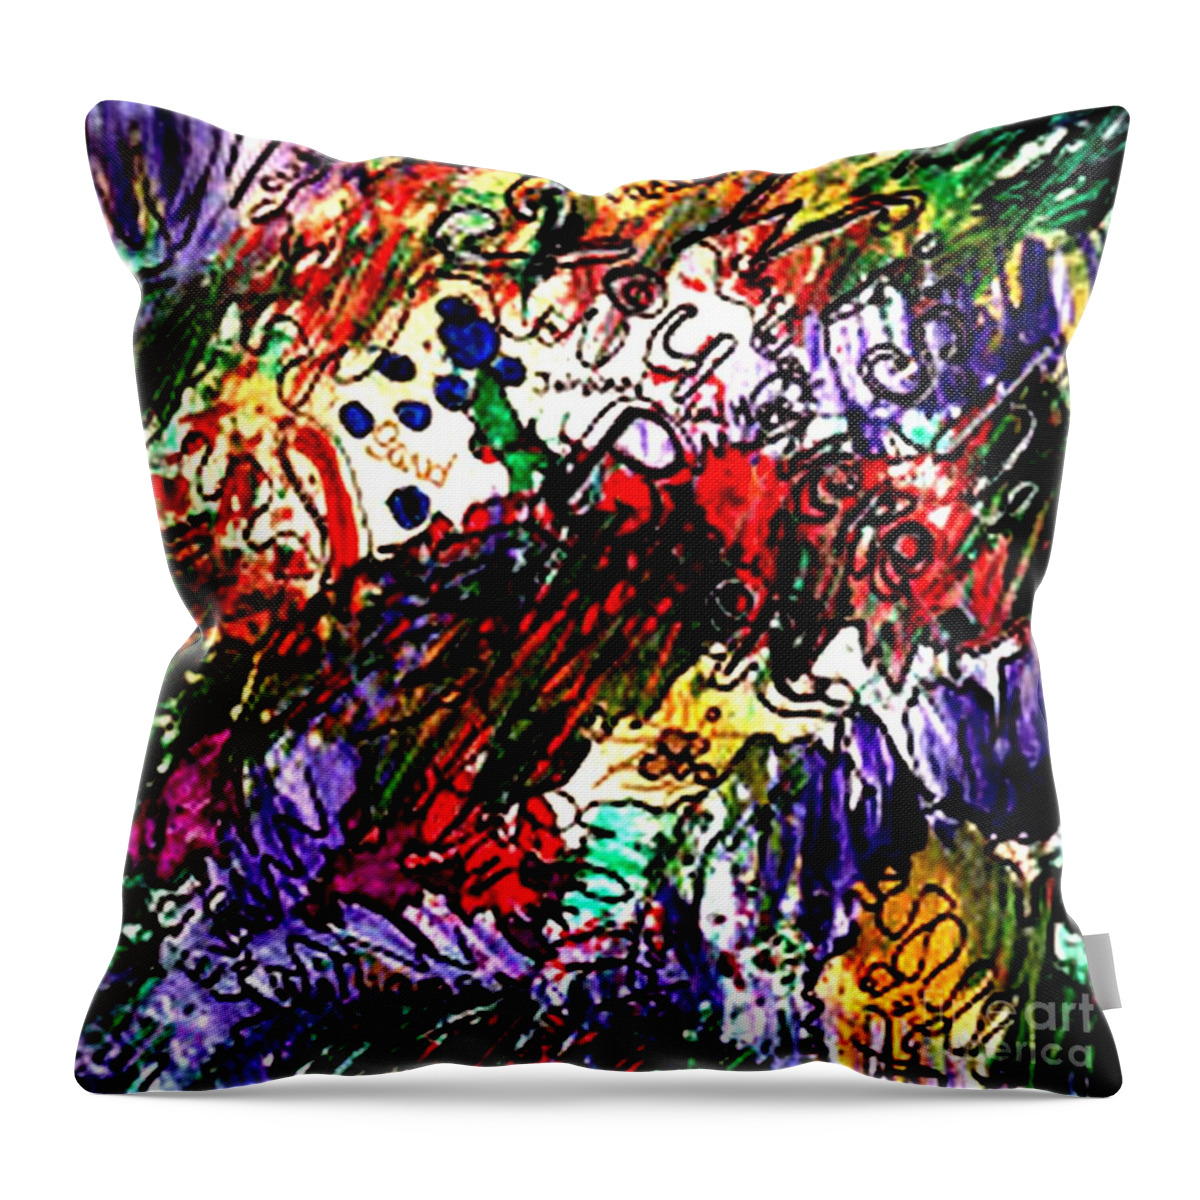 Drink Up Throw Pillow featuring the painting Drink Up by Donna Daugherty